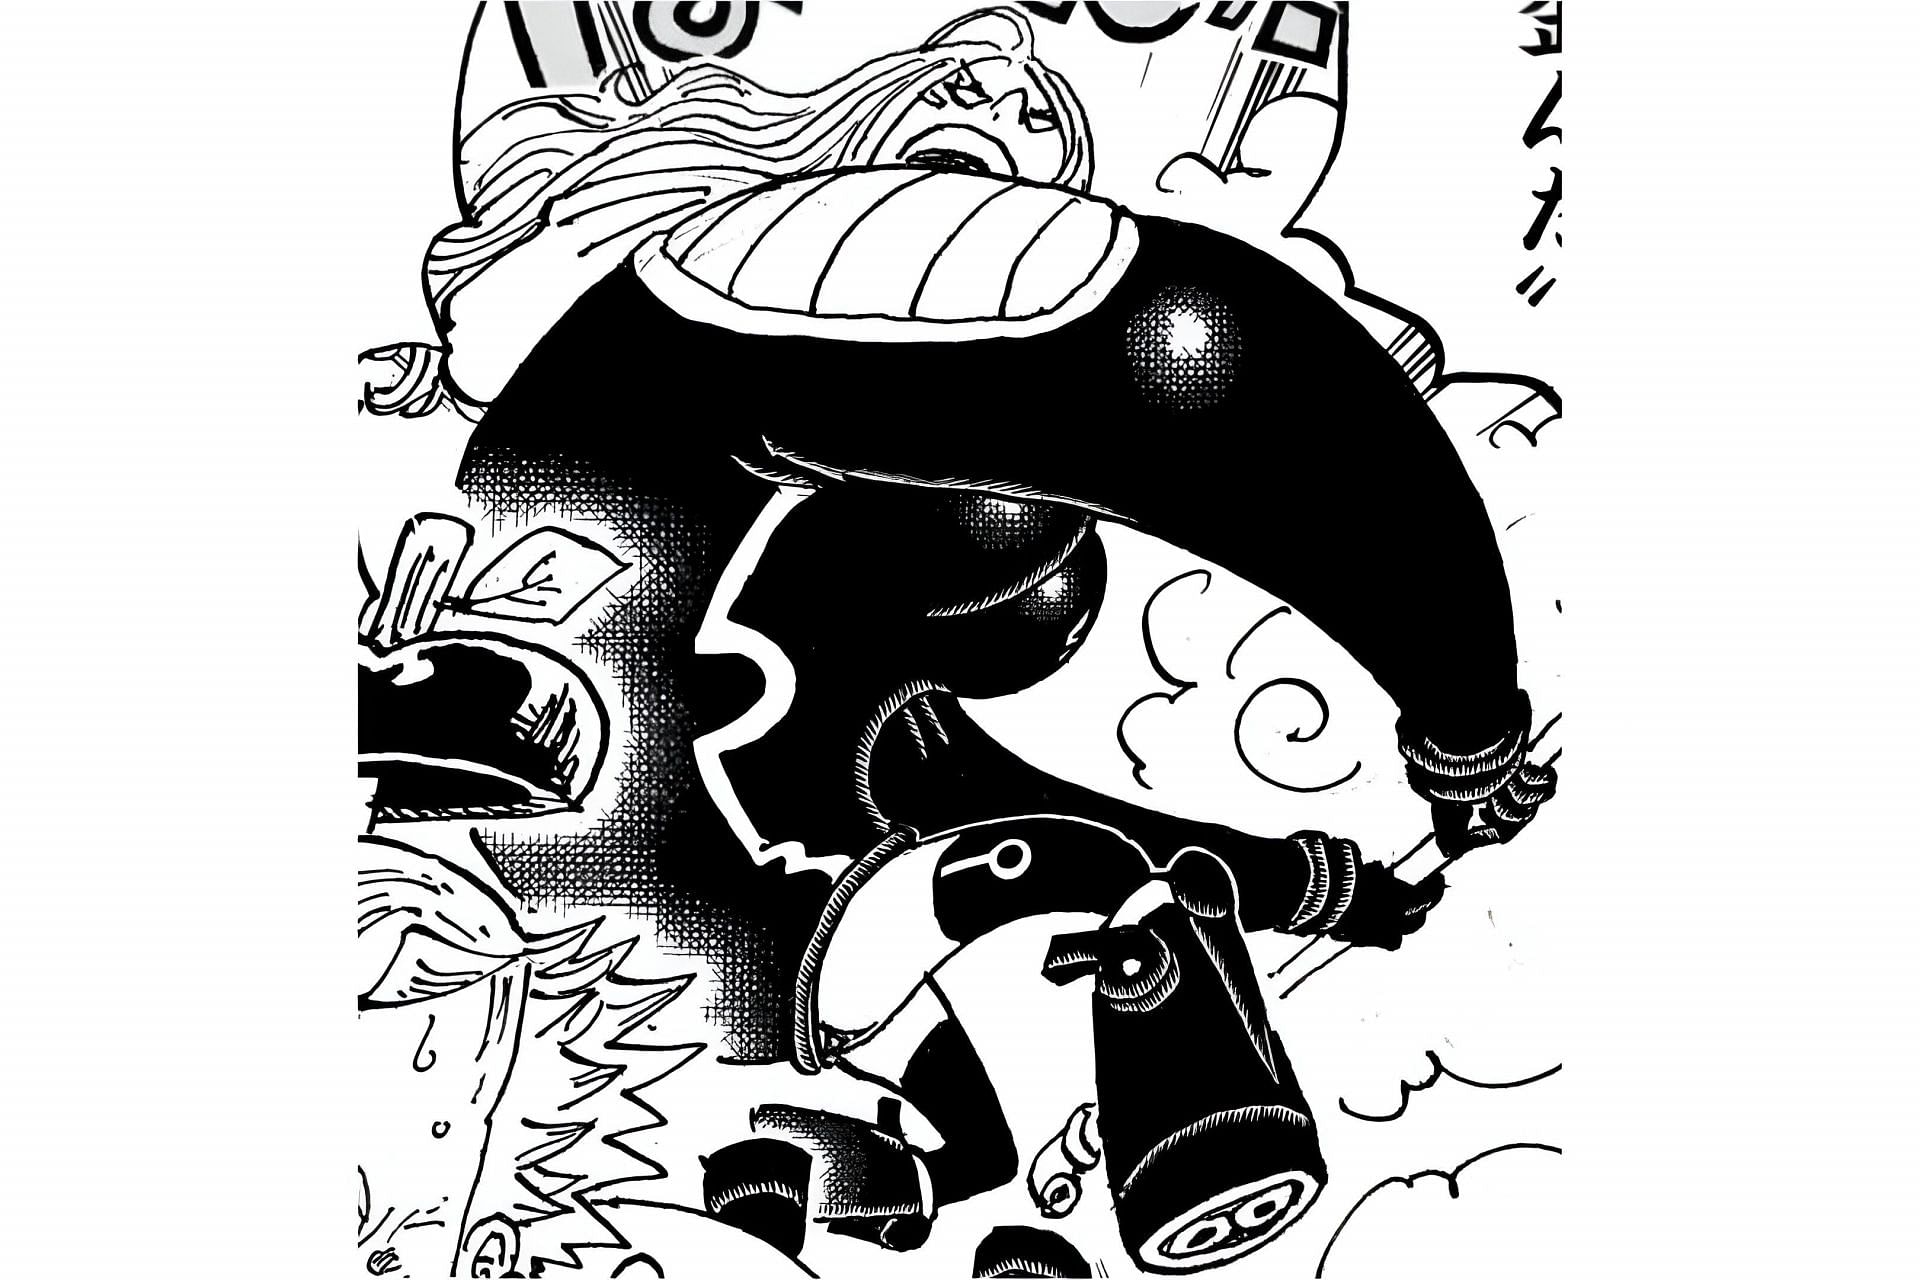 Bonney&#039;s Nika form in the past, as seen in the manga (Image via Shueisha)